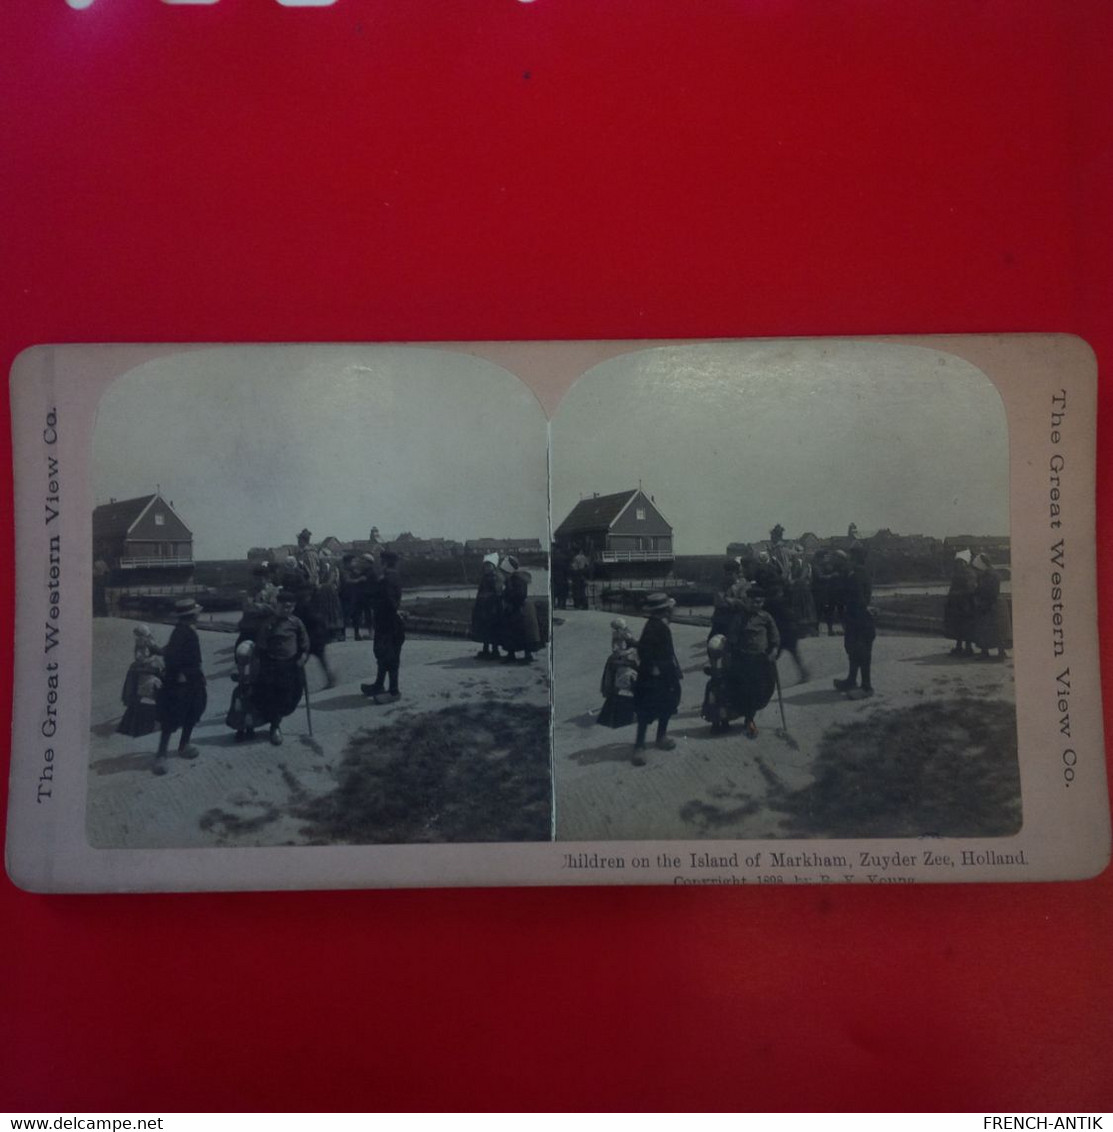 PHOTO STEREO HOLLAND CHILDREN ON THE ISLAND OF MARKHAM ZUYDER ZEE - Stereoscopic